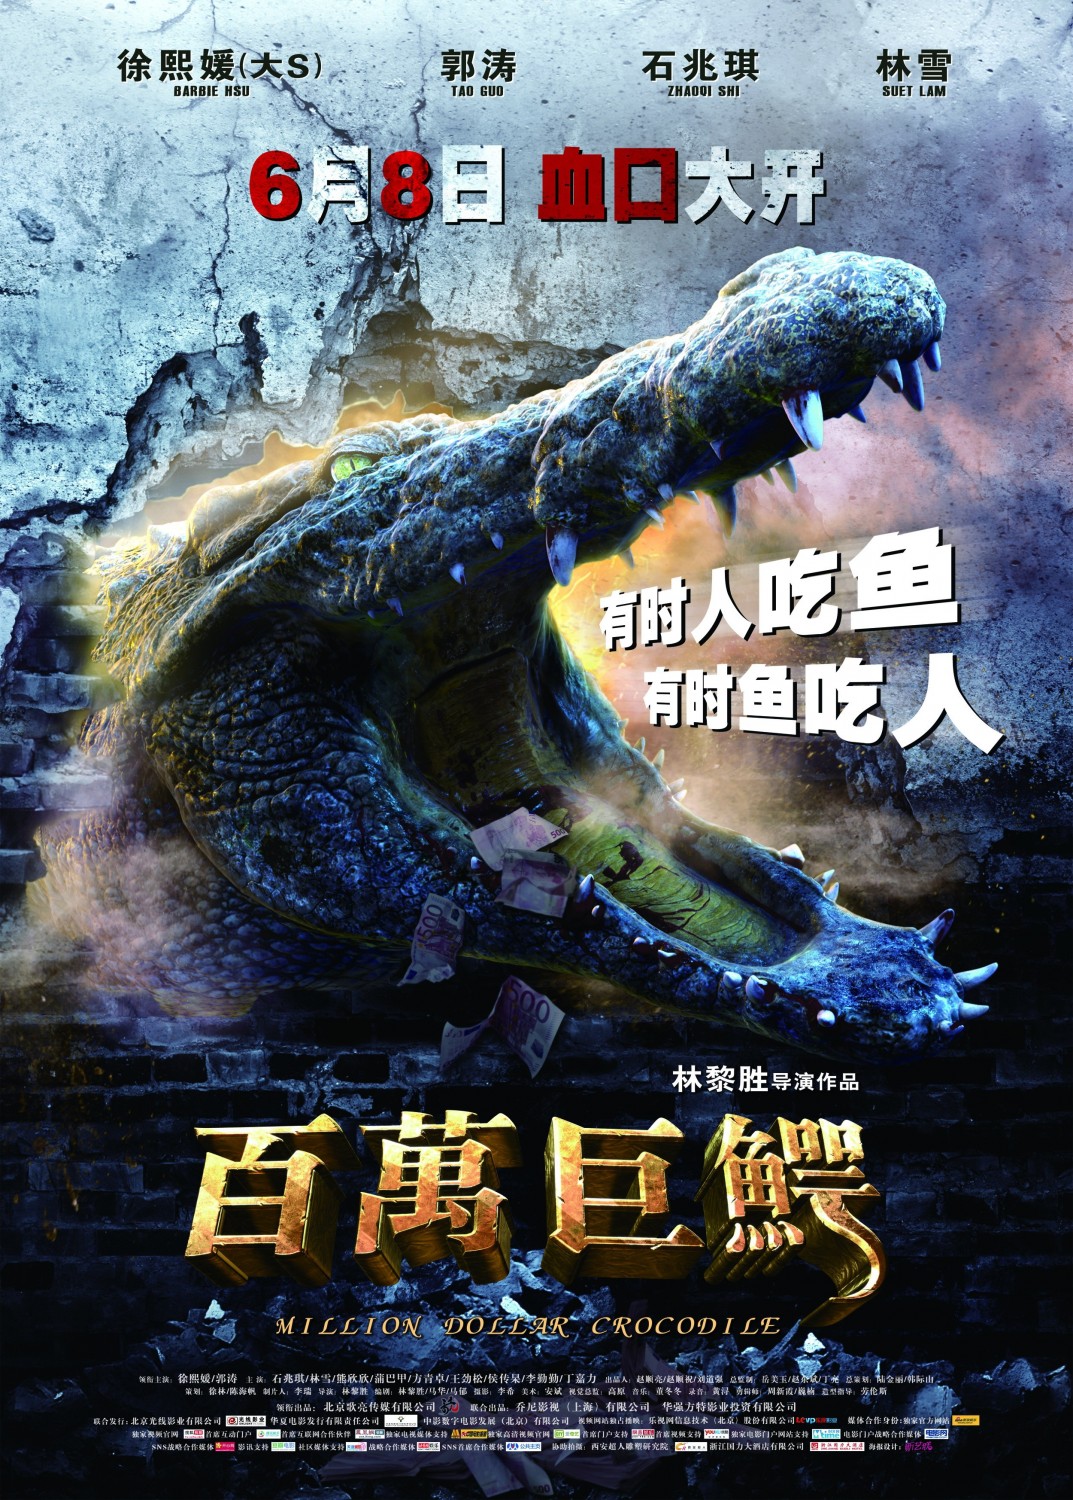 Extra Large Movie Poster Image for Million Dollar Crocodile (#3 of 5)